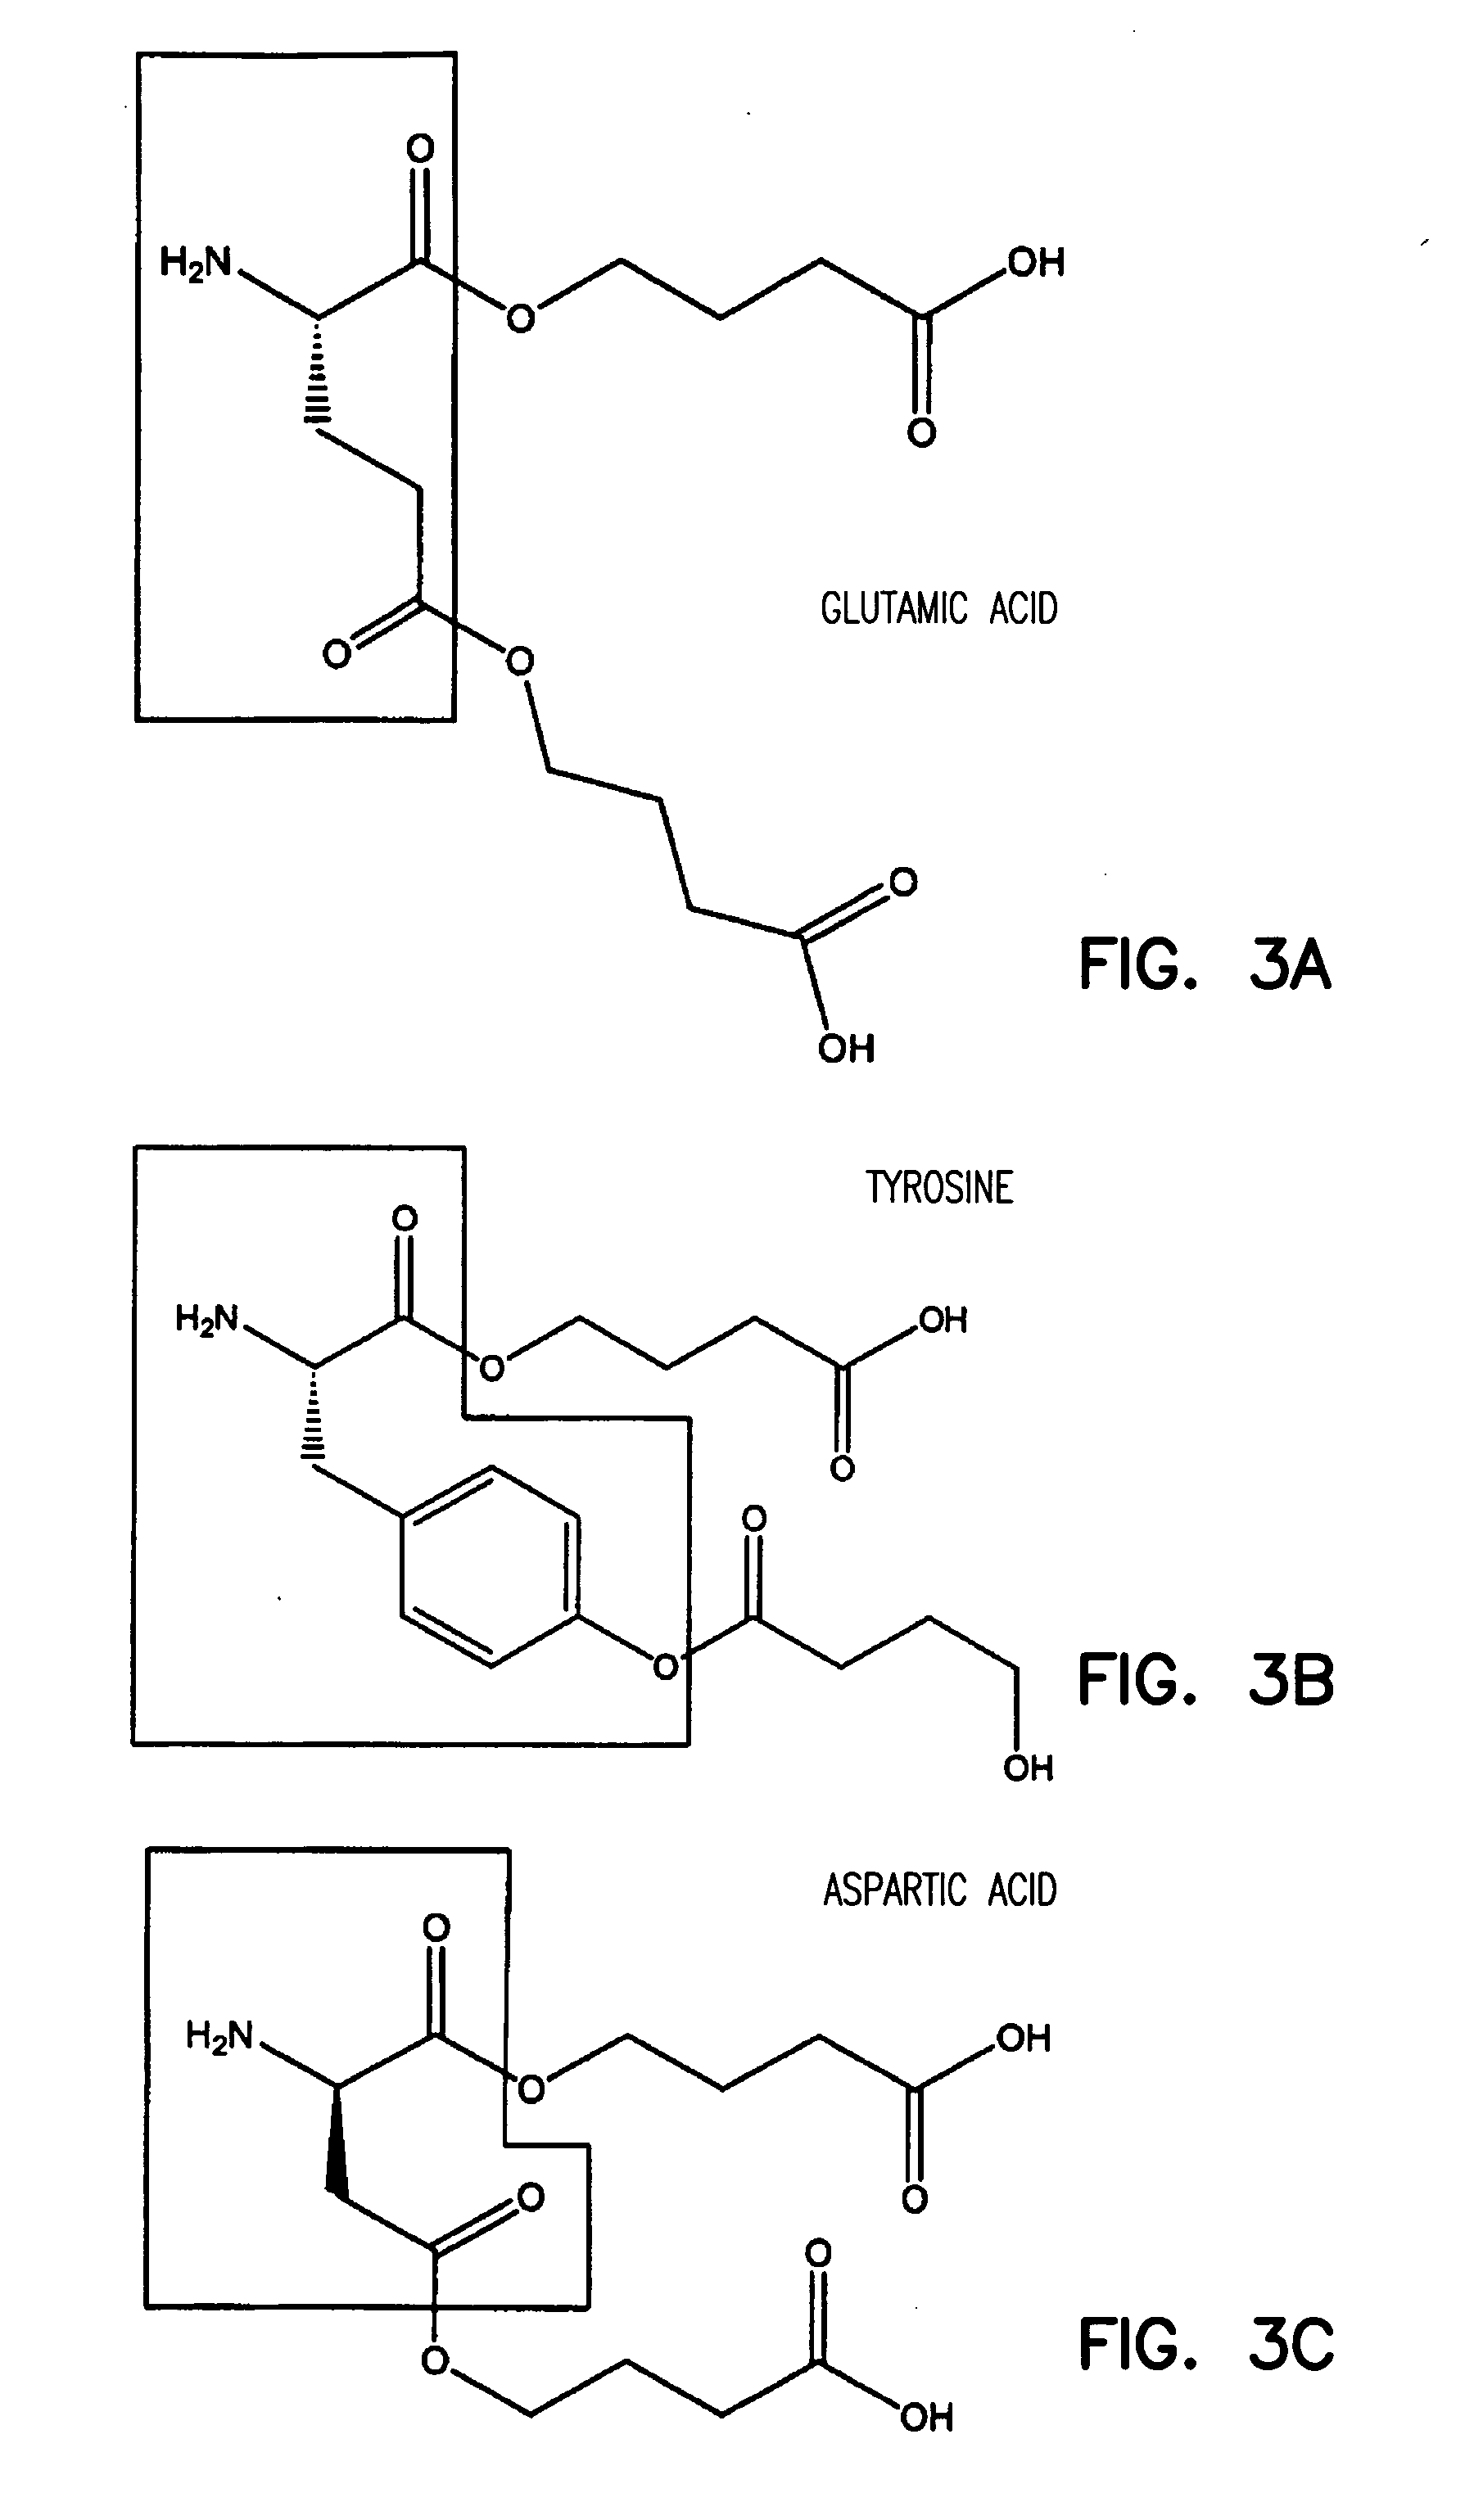 Gamma-hydroxybutyrate compositions containing carbohydrate, lipid or amino acid carriers